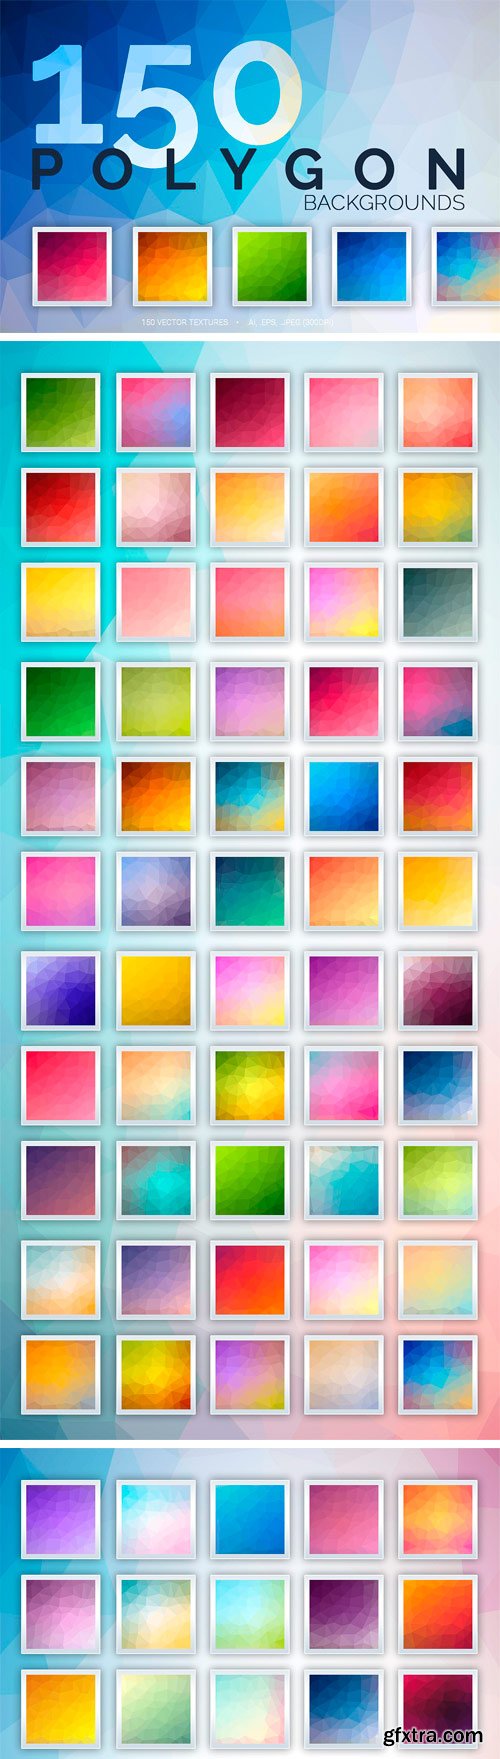 CM - 150 Polygon Backgrounds 1869974